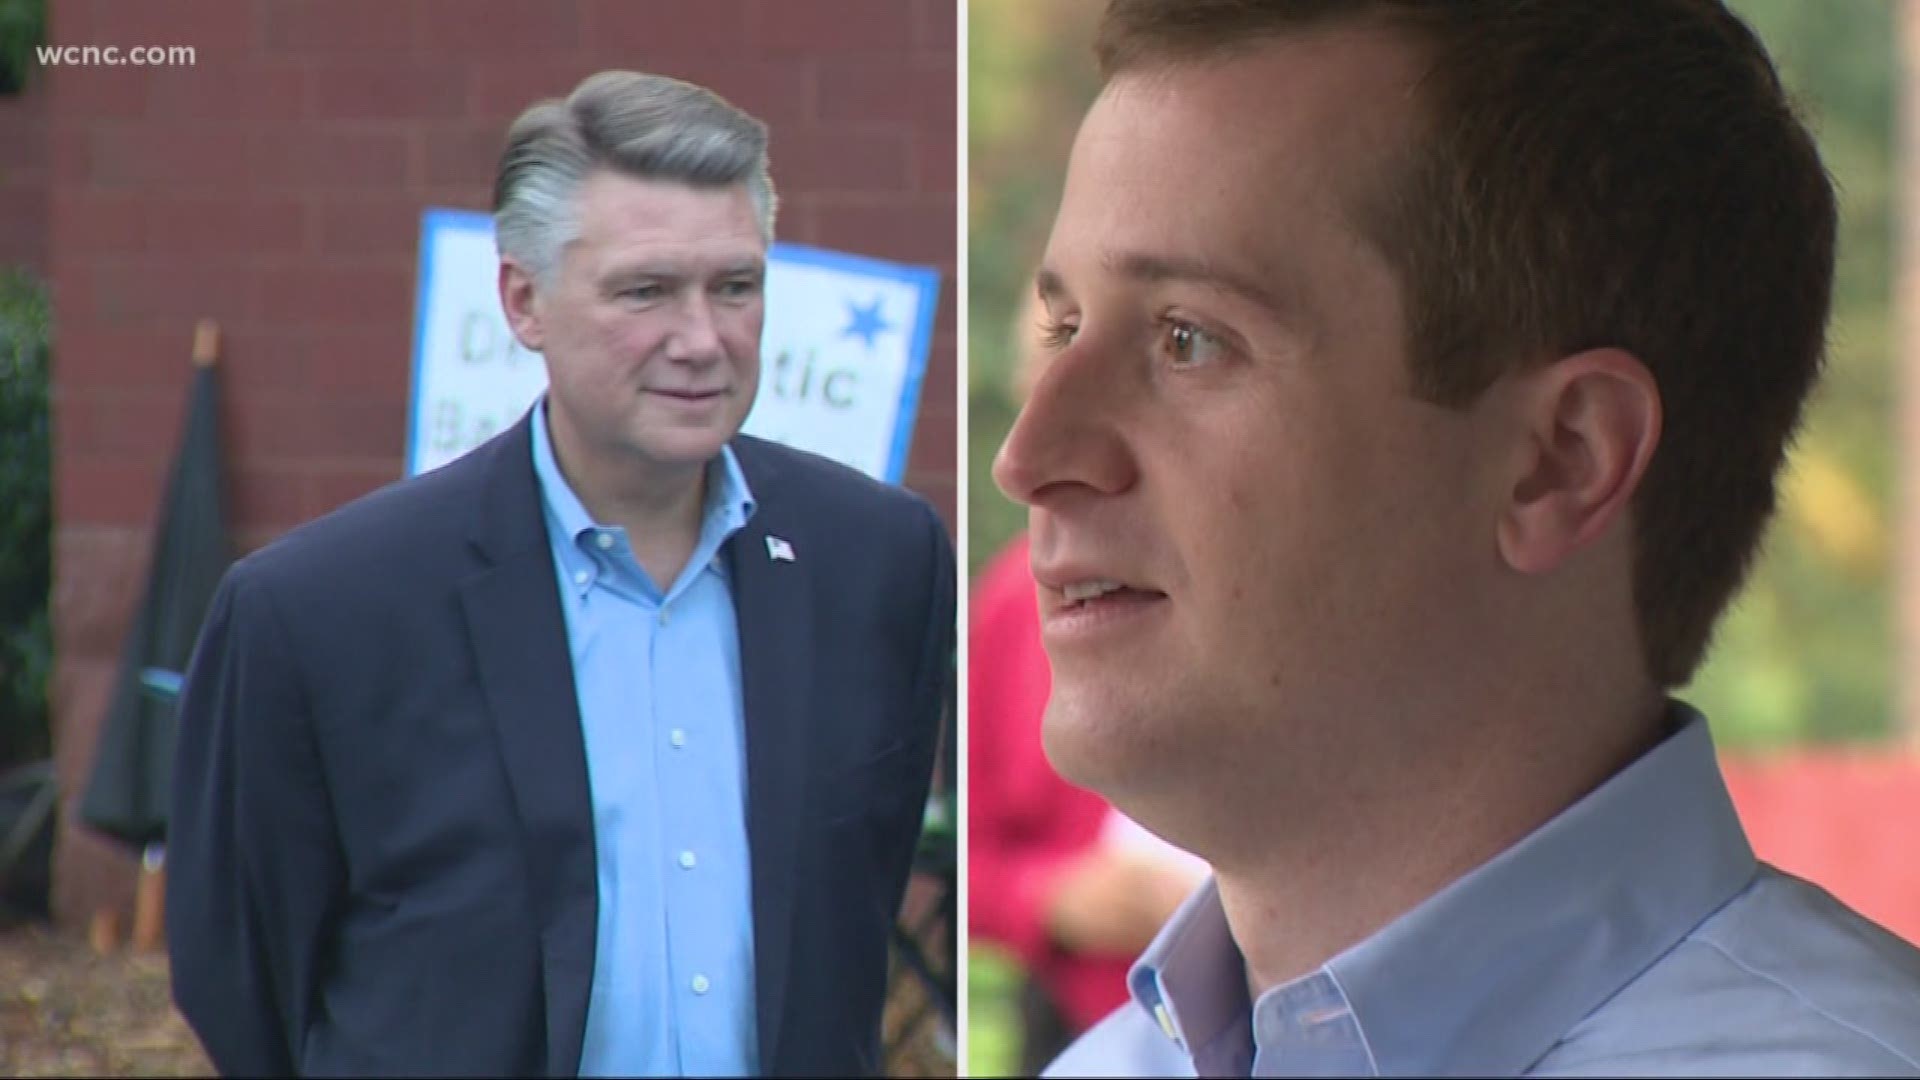 One of the races grabbing the national races, North Carolina's 9th Congressional District, is expected to come down to the wire.